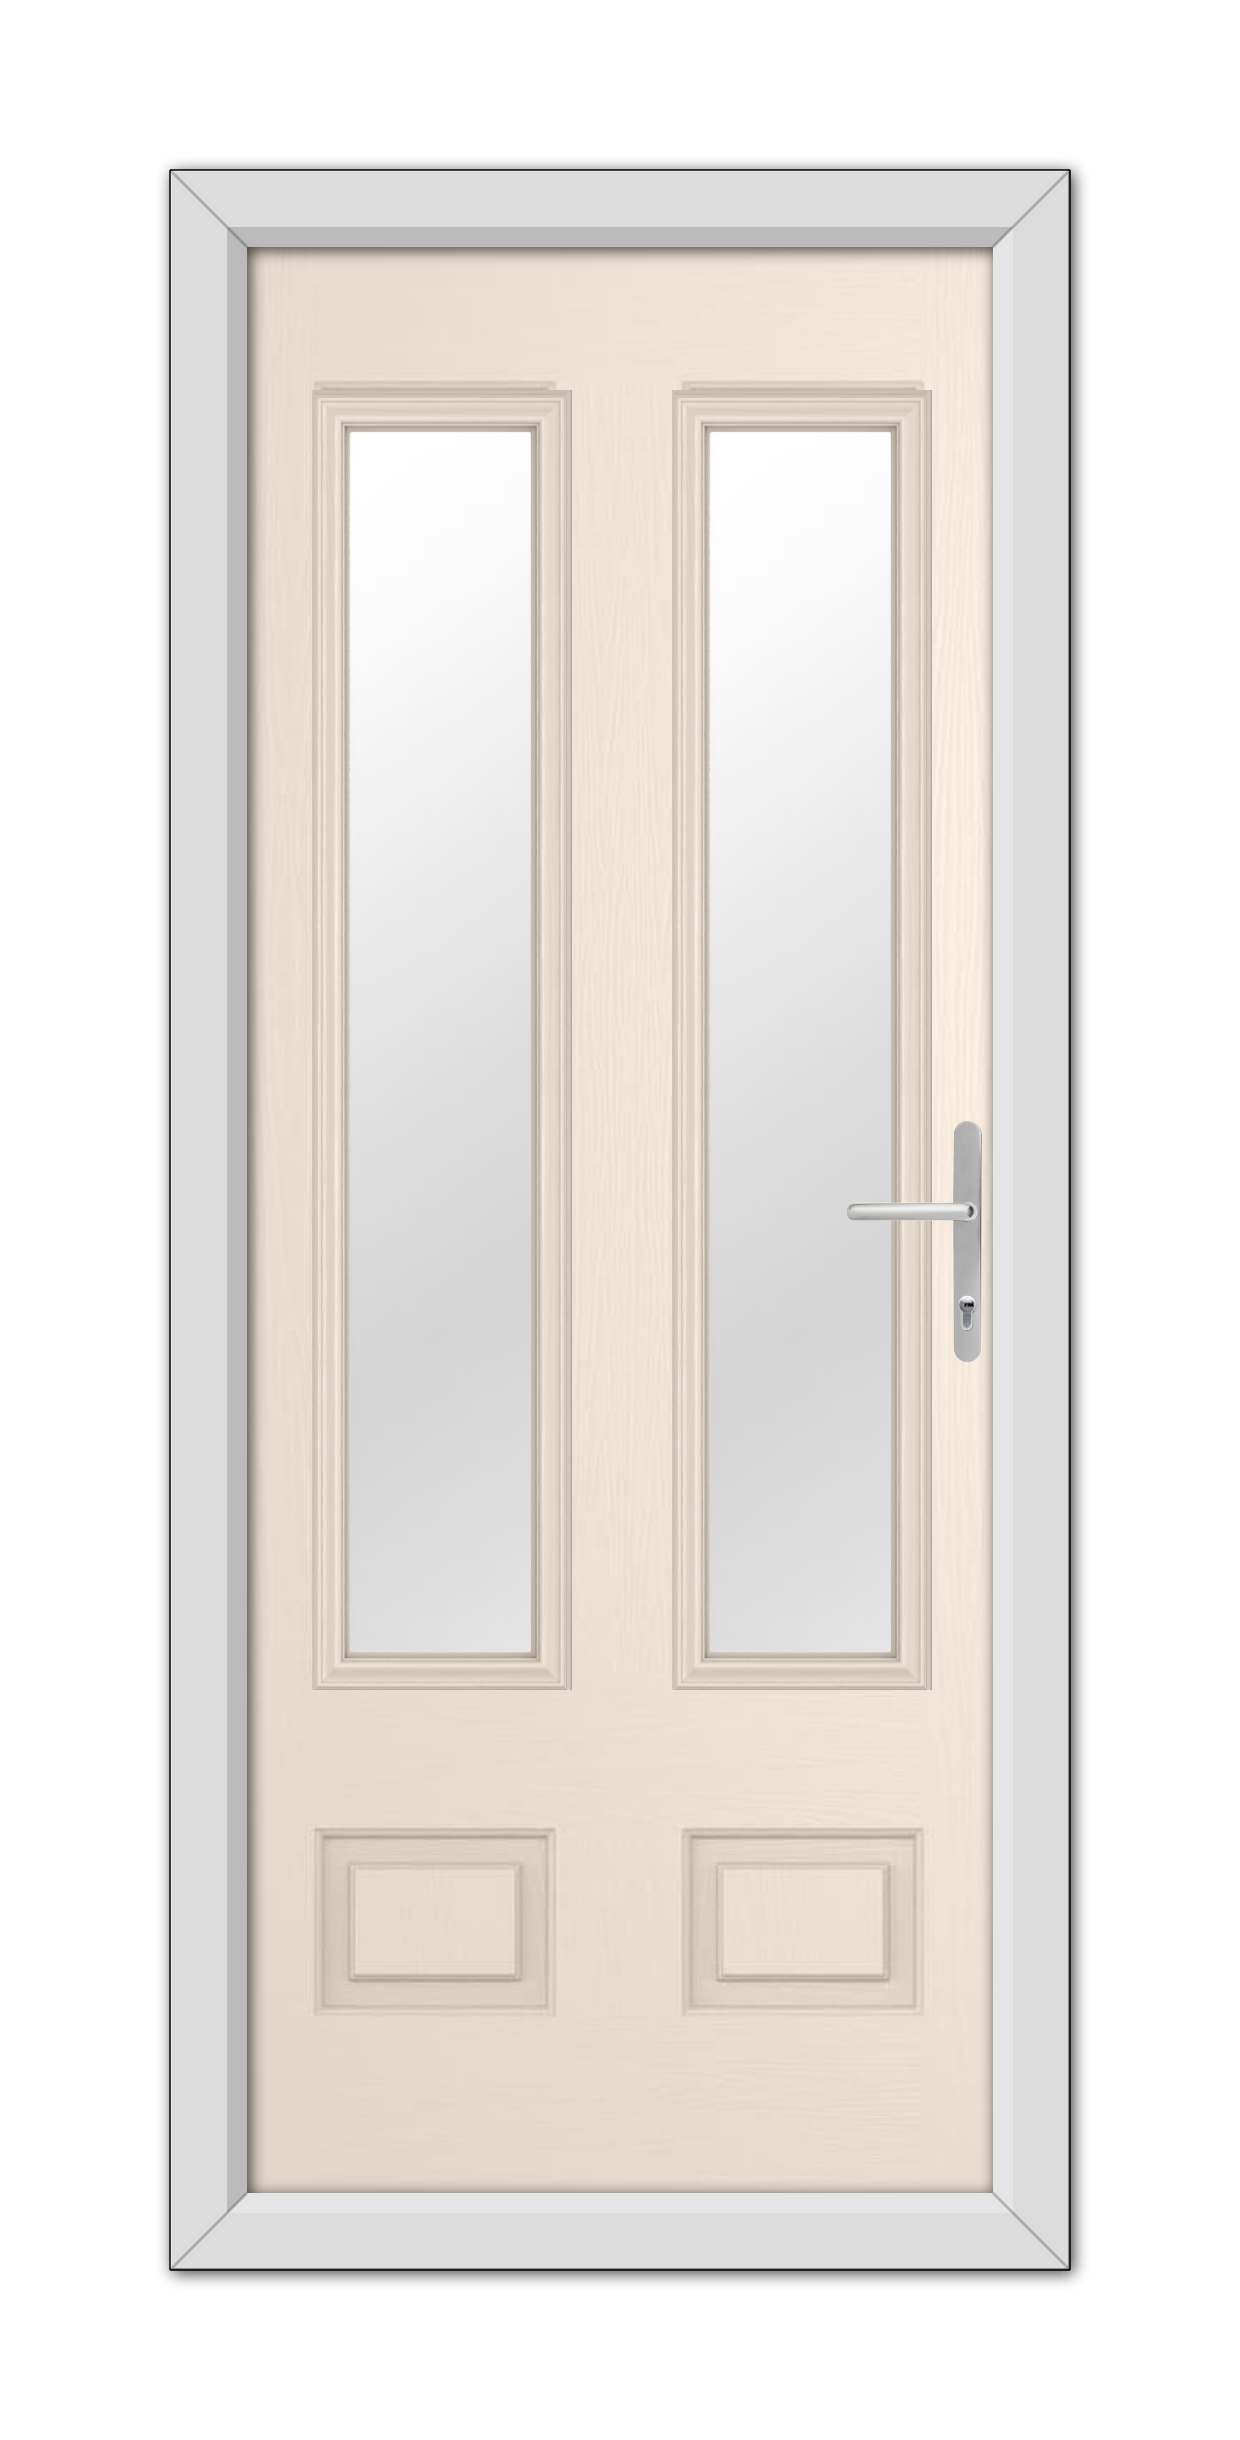 Cream Aston Glazed 2 Composite Door 48mm Timber Core with wooden frames and glass panels, featuring a modern handle.